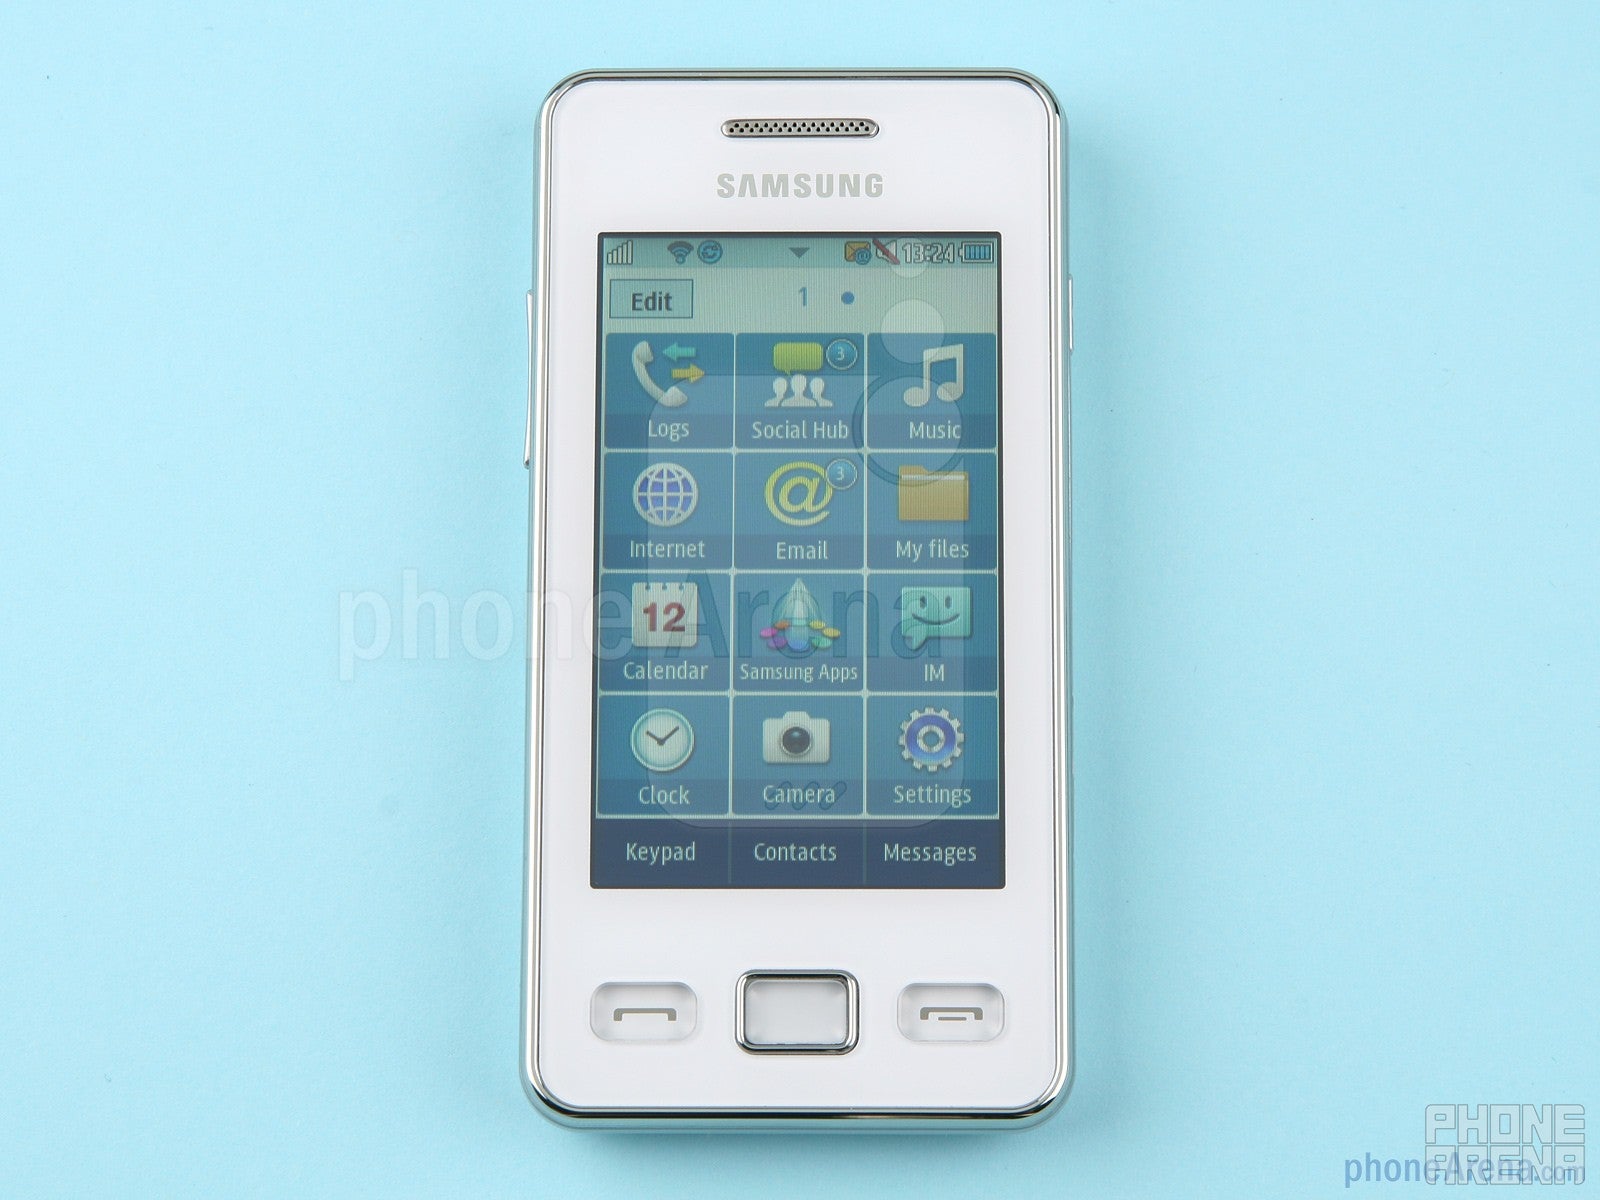 The Samsung Star II comes with a 3.0-inch touchscreen - Samsung Star II Review